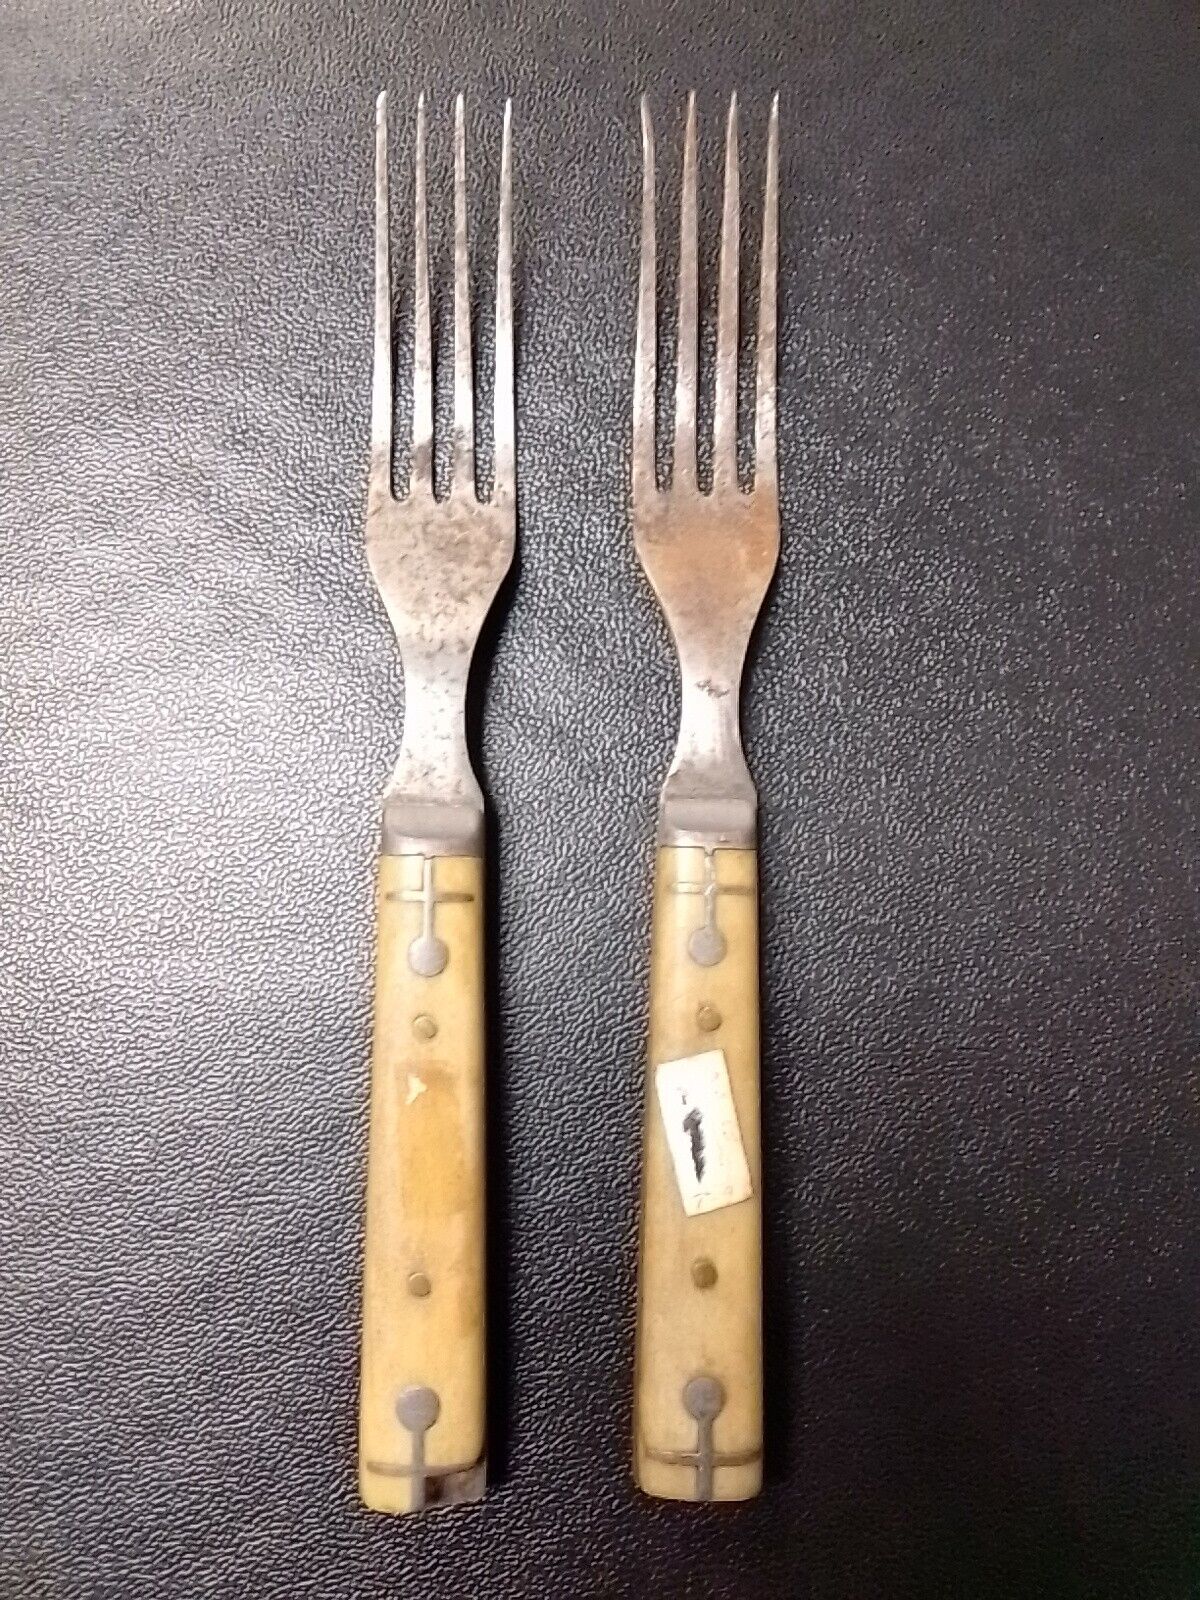 As-is Chipped Antique Or Vintage War Era Forks WWI or WWII